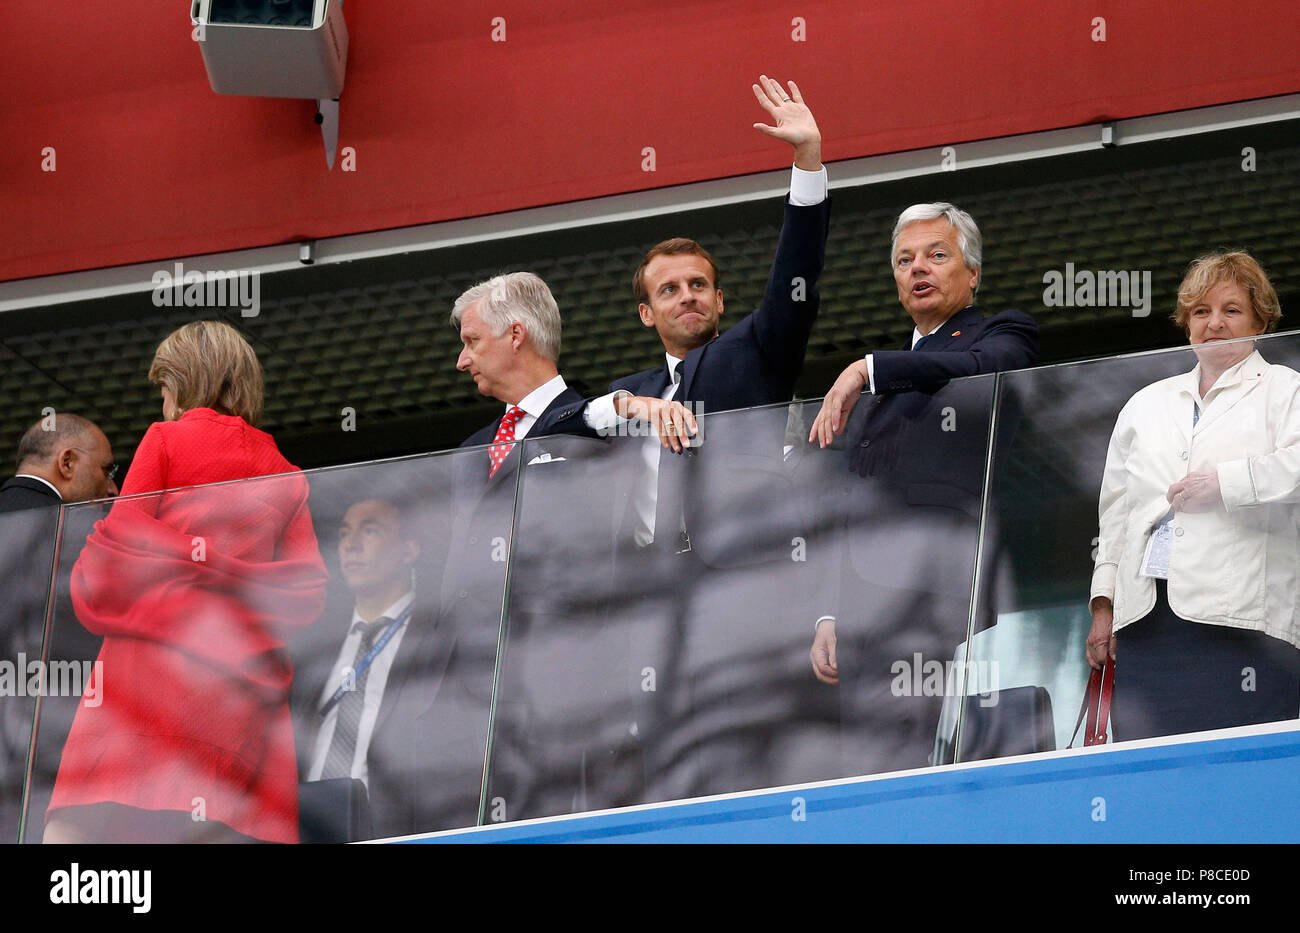 St Petersburg, Russia. 10th July, 2018. A waving Emmanuel Macron (President of France, centre) with Queen Mathilde of Belgium (left), Philippe of Belgium (2nd left) and David Hill of the FA (2nd right) during the 2018 FIFA World Cup Semi Final match between France and Belgium at Saint Petersburg Stadium on July 10th 2018 in Saint Petersburg, Russia. (Photo by Daniel Chesterton/phcimages.com) Credit: PHC Images/Alamy Live News Stock Photo